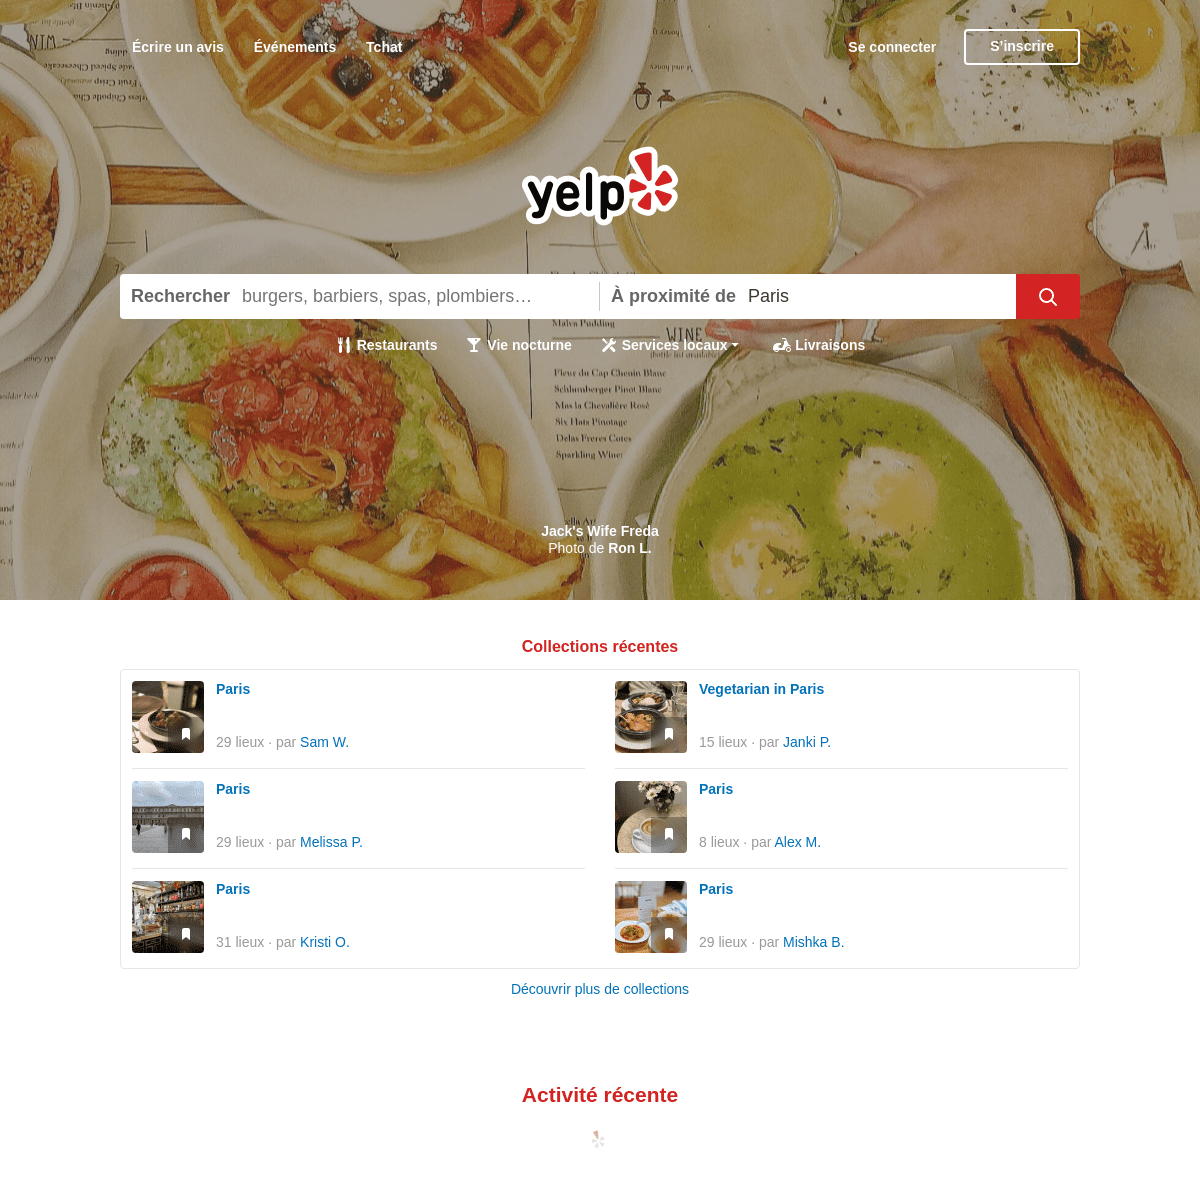 A complete backup of https://yelp.fr